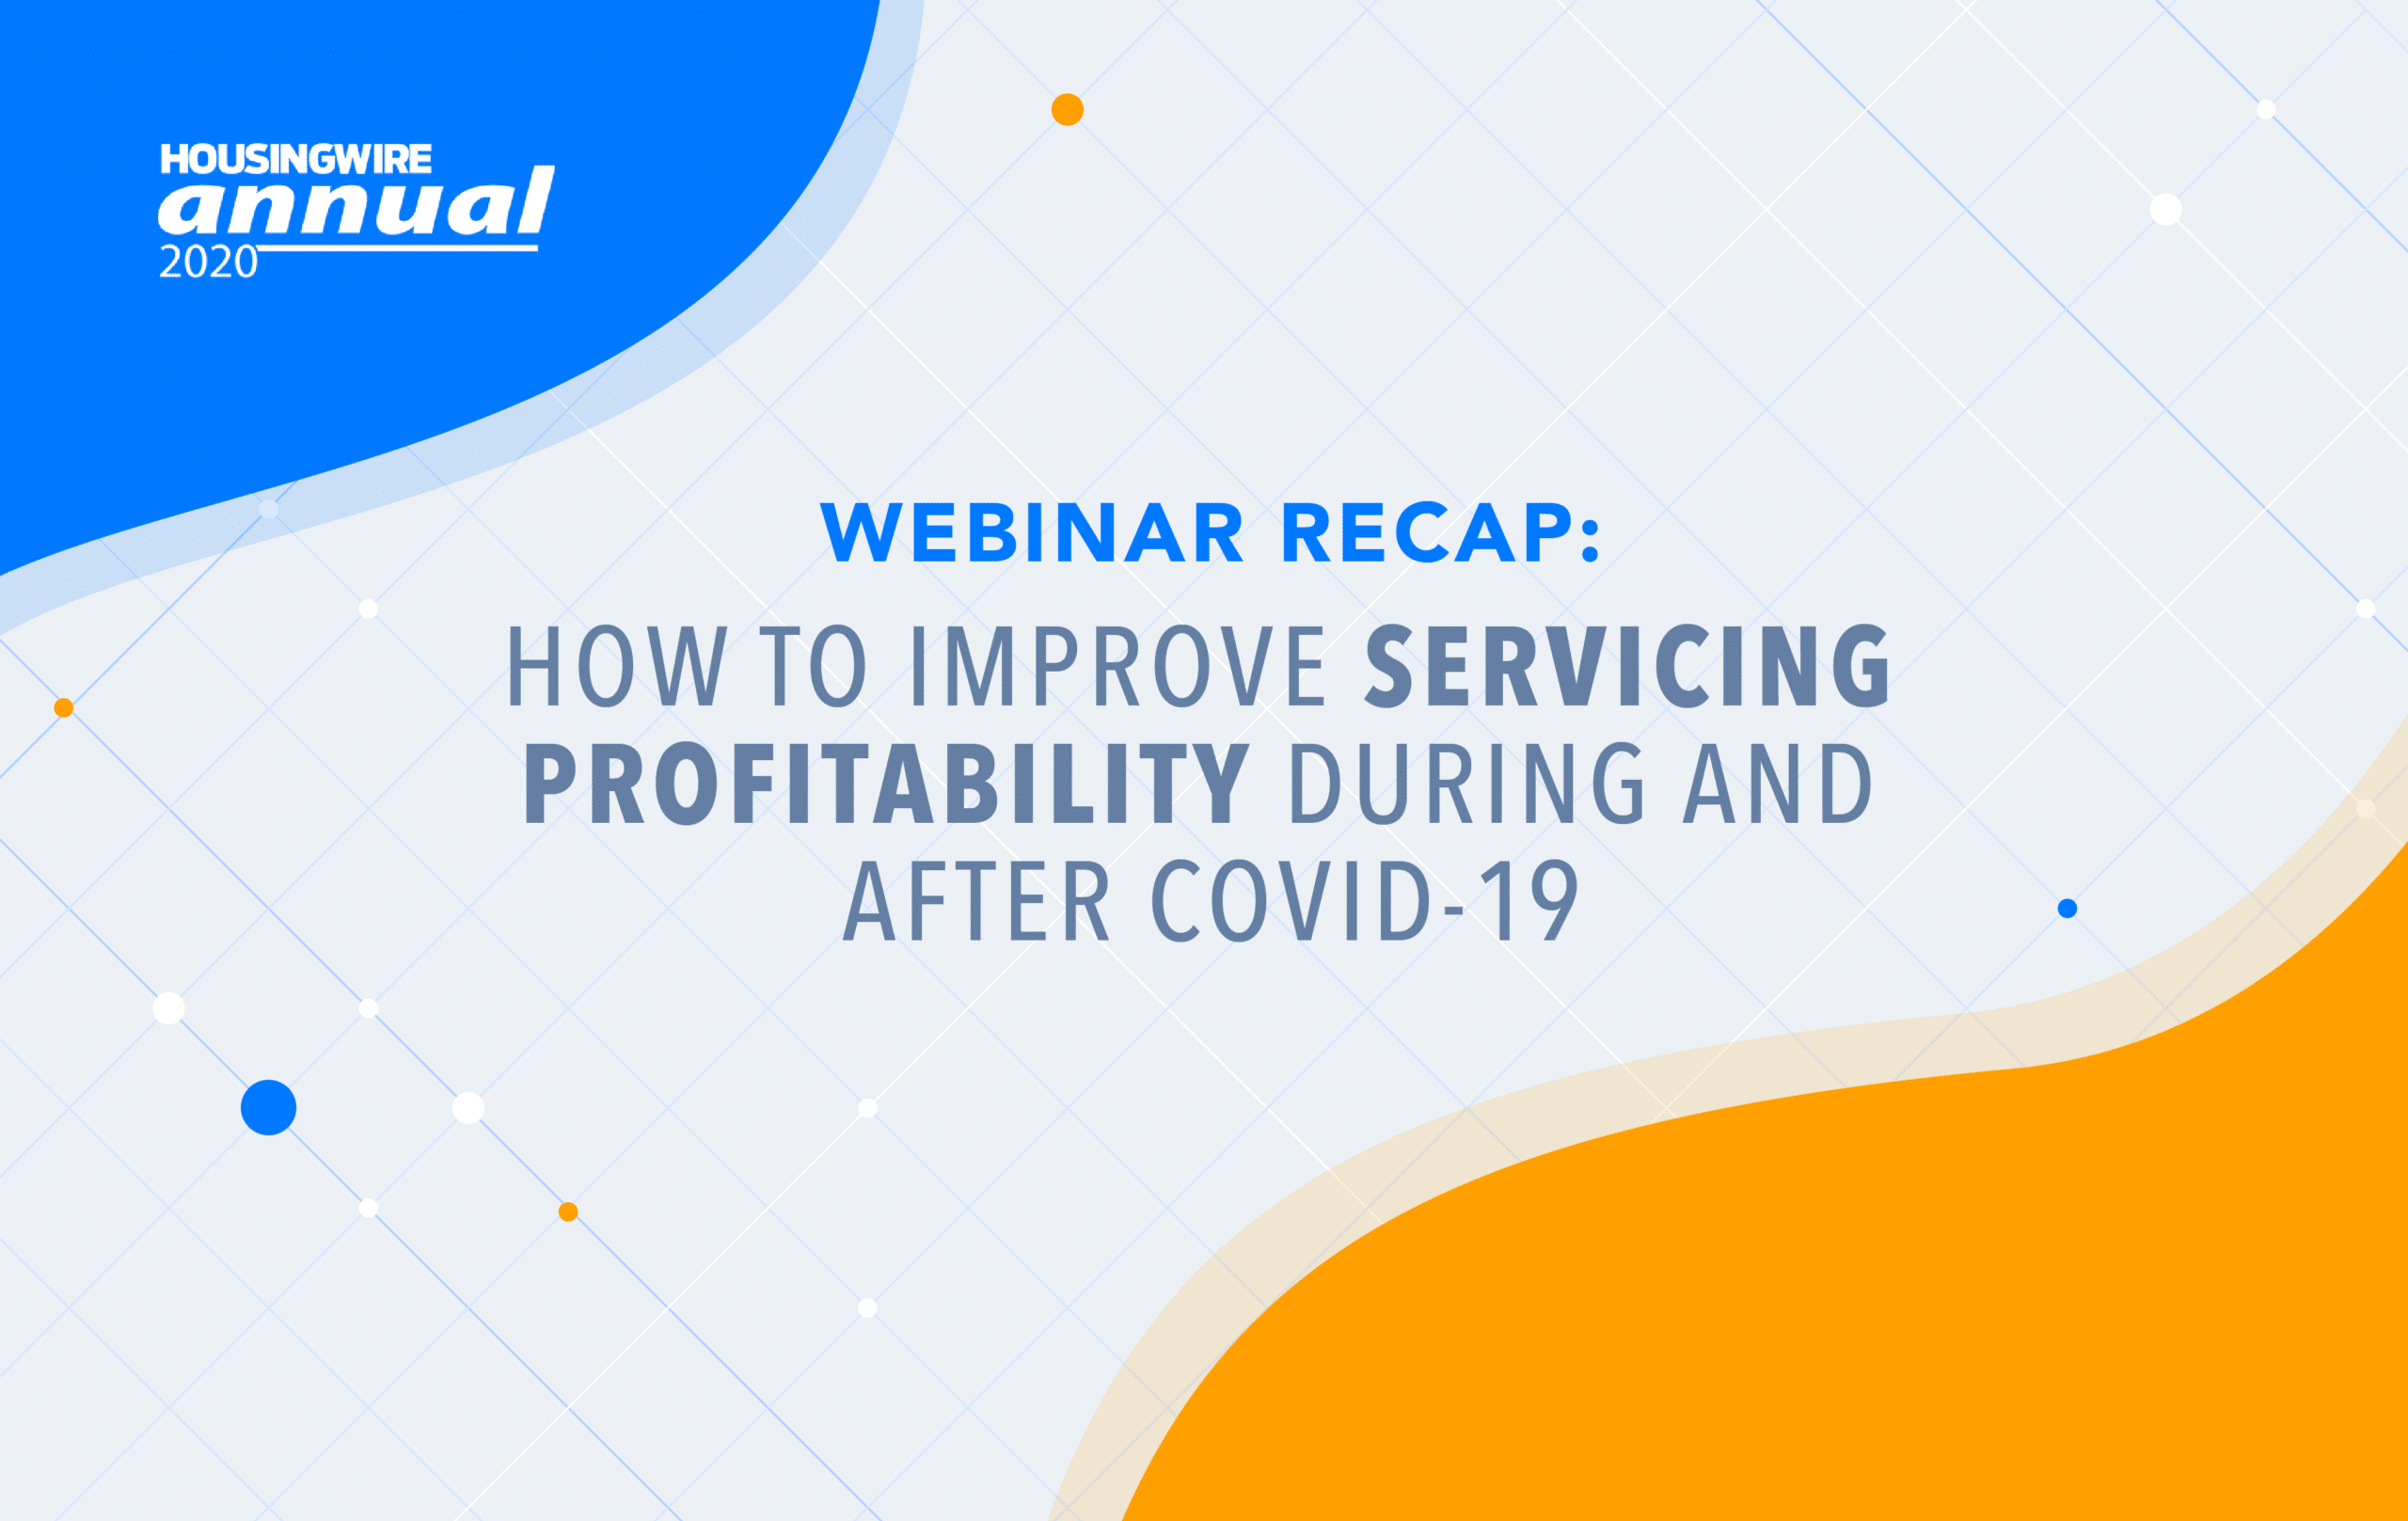 Recap: How to Improve Servicing Profitability During and After COVID-19